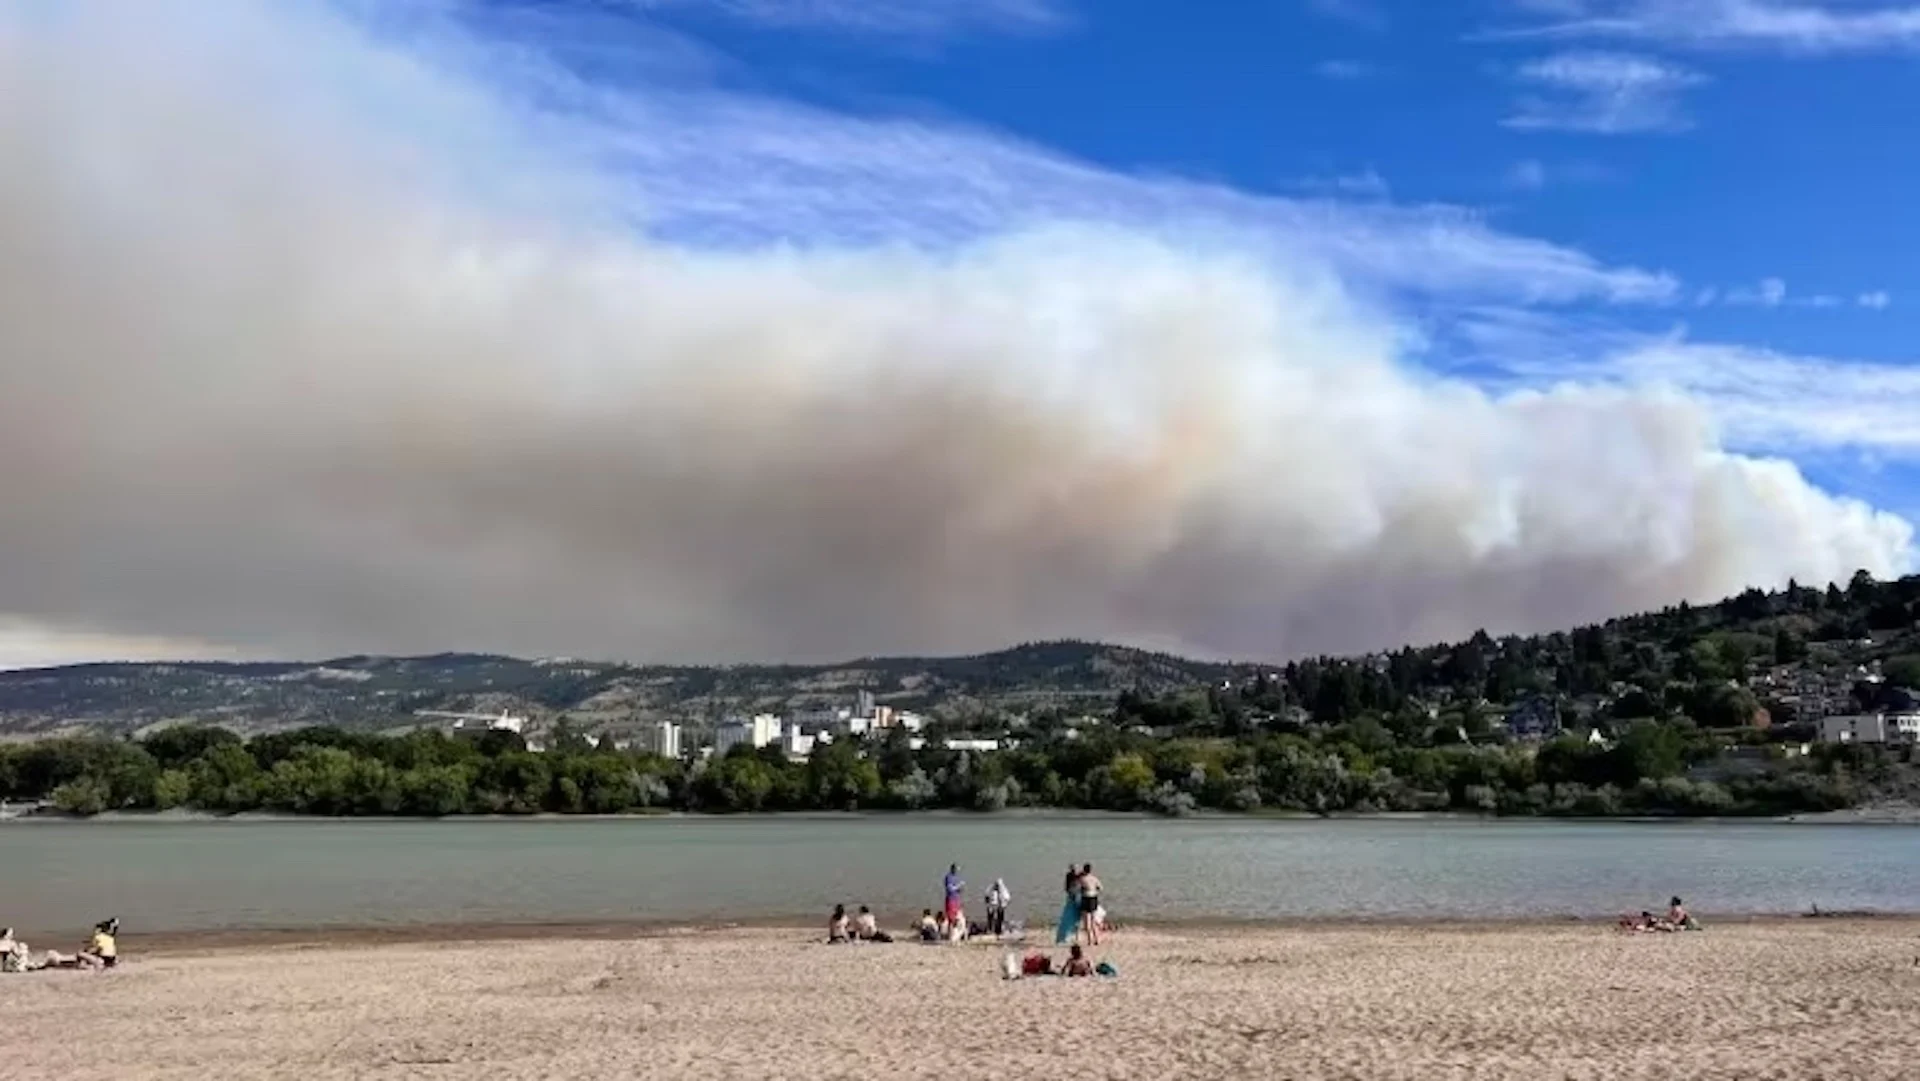 Wind, hot, dry weather fans flames of wildfires in B.C.'s Interior and north